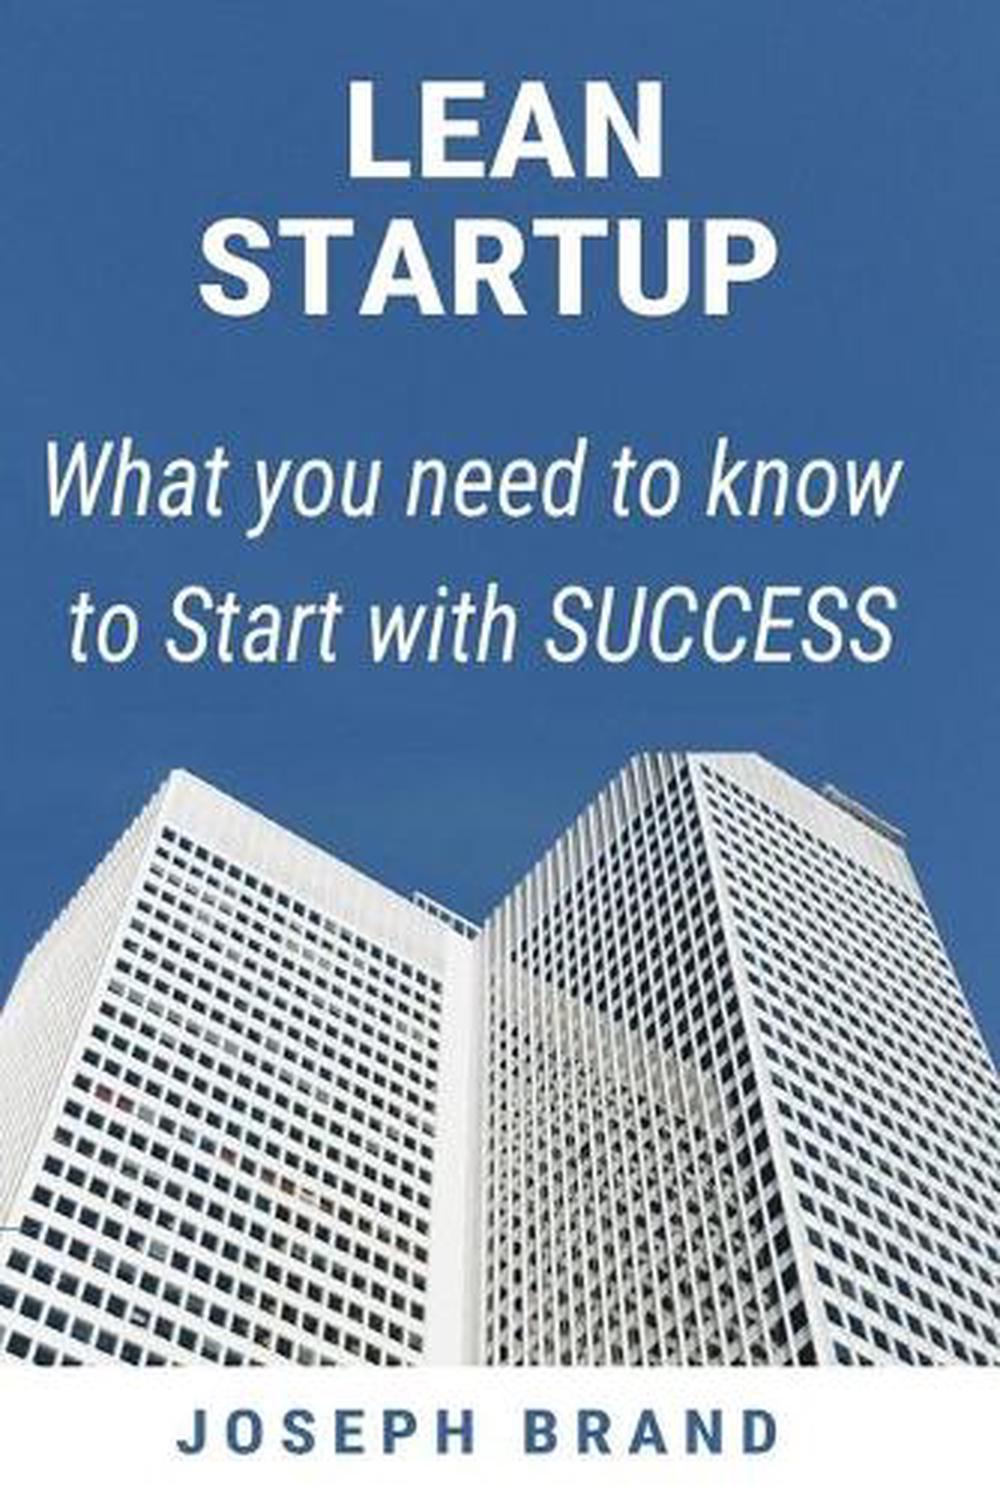 the lean startup book buy